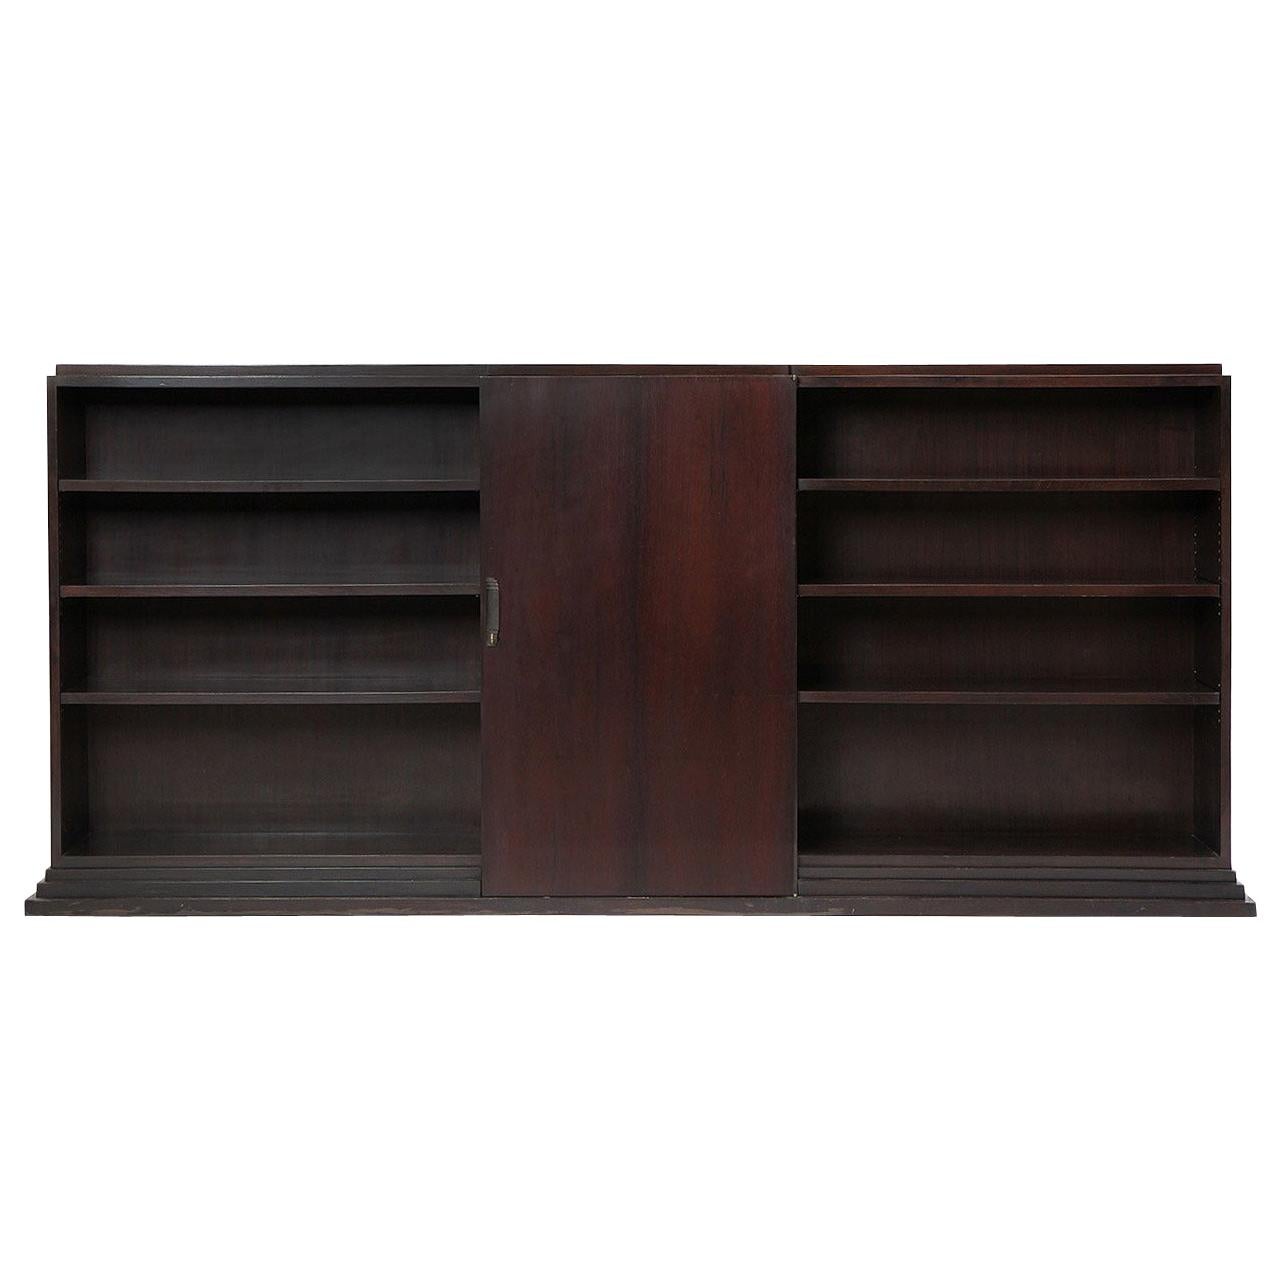 1930s Unattributed French Modernist Rosewood Bookcase For Sale